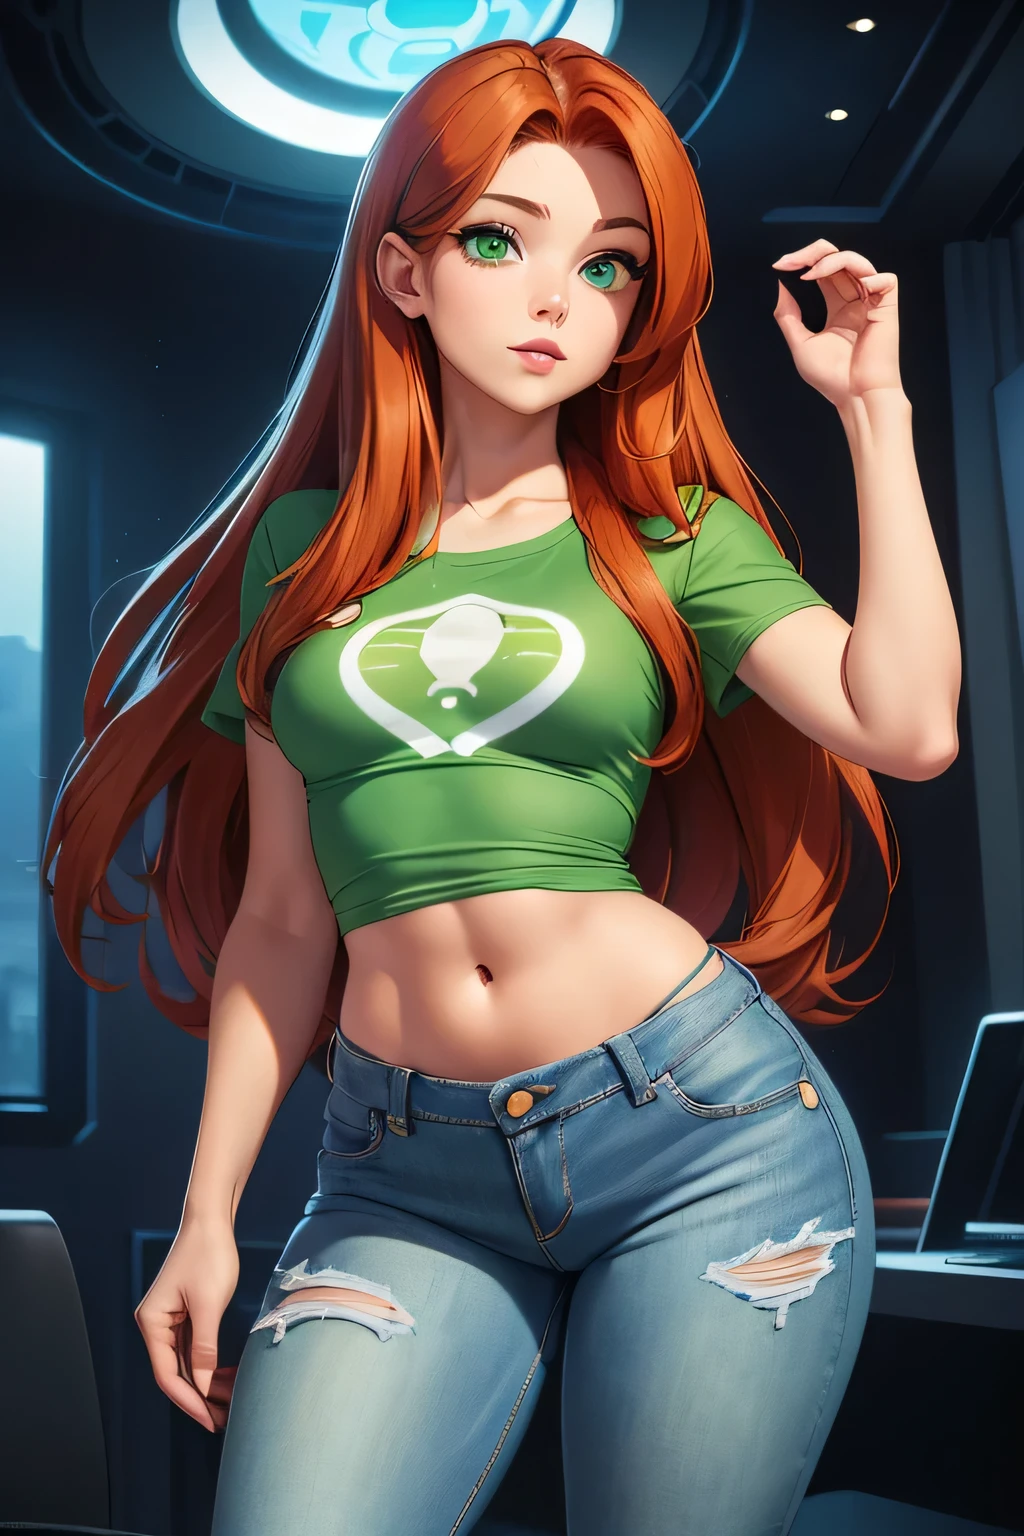 ((Solo)) ((Masterpiece)) ((High Quality)) ((Perfect Face)) ((Small Breasts)) ((Wide Hips)) ((Narrow Waist)) ((Beautiful)) ((Auburn Hair)) ((Long Hair)) ((Light Skin)) ((Cute Nose)) ((Green Eyes)) ((Young)) ((UFO Tee Shirt)) ((Jeans)) ((sci-fi Geek))